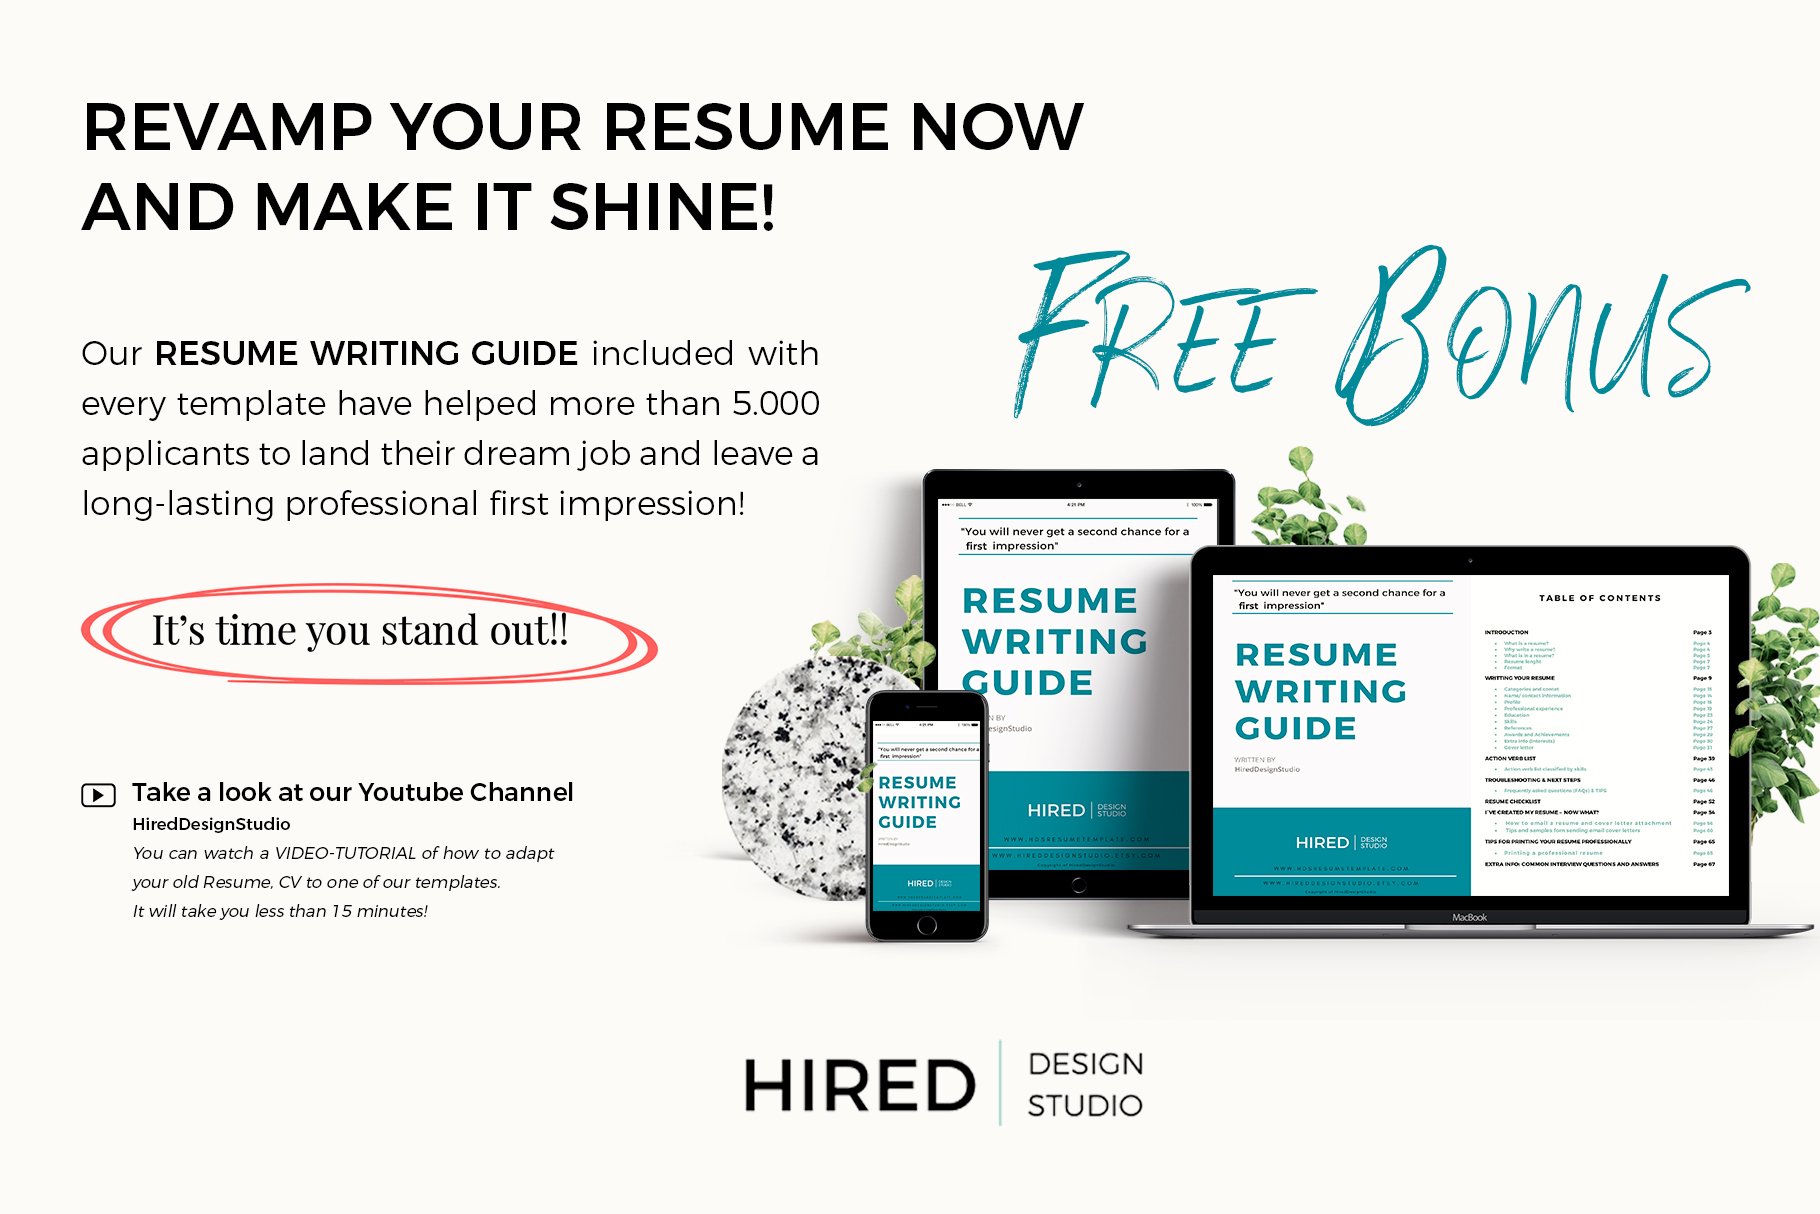 resume wrinting guide and job interview tips 81